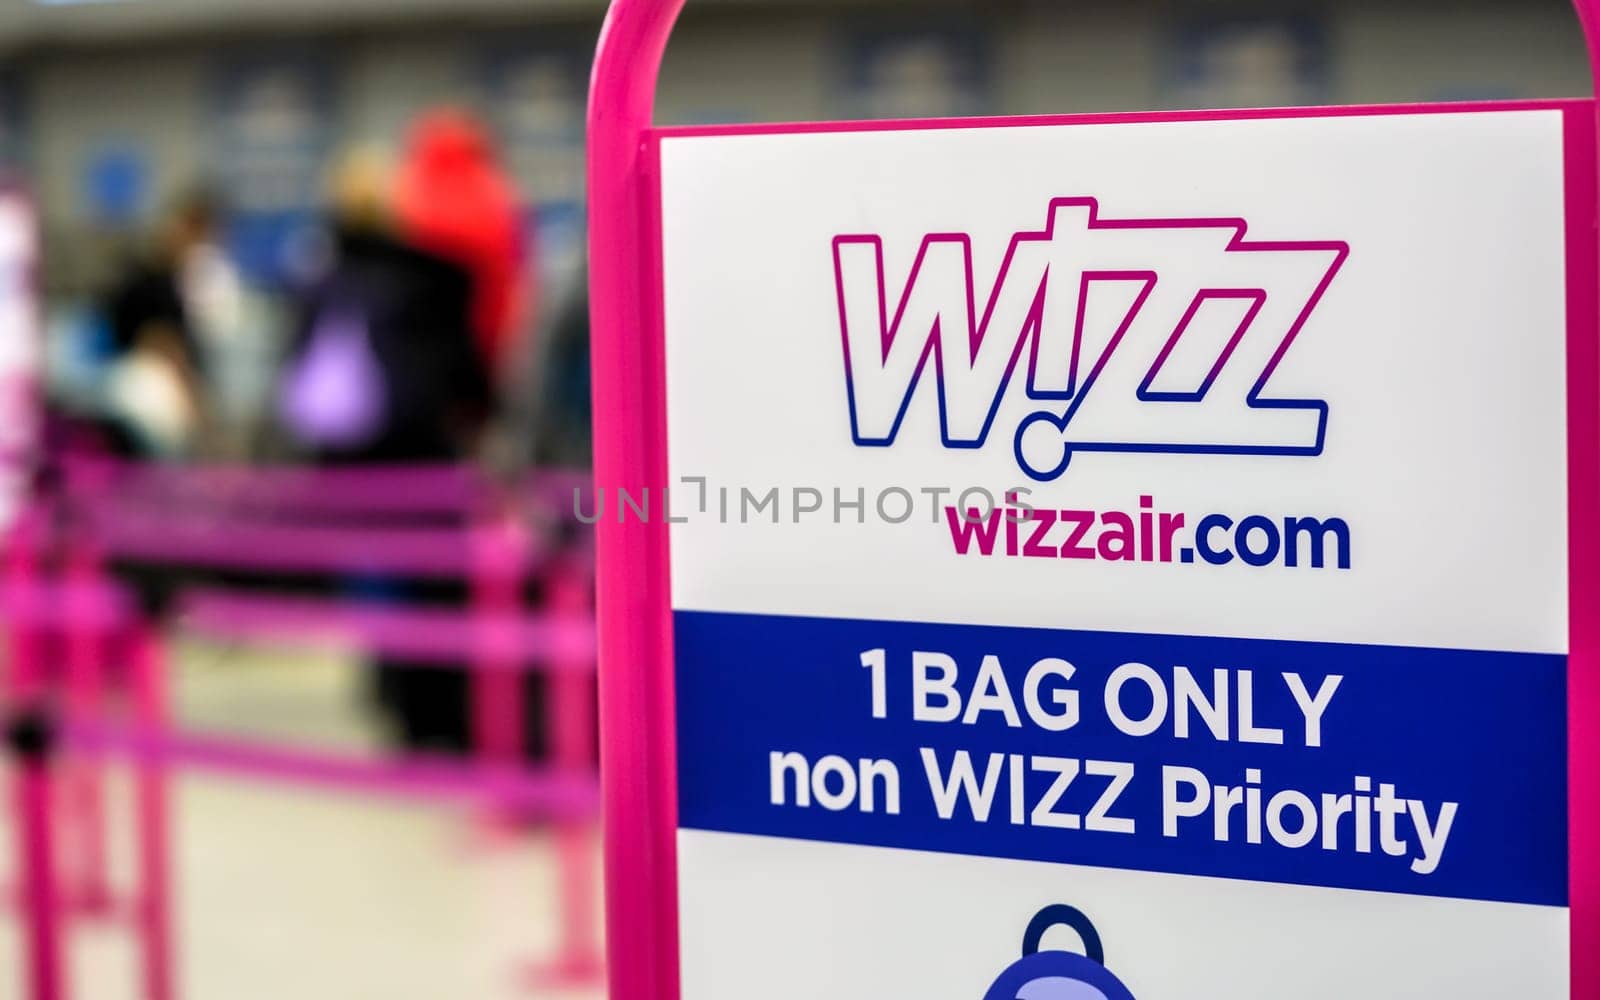 London, United Kingdom - February 05, 2019: Wizzair info table about maximum baggage size, blurred people at check in desks in background Wizz is Hungarian low cost operator founded in 2003 by Ivanko